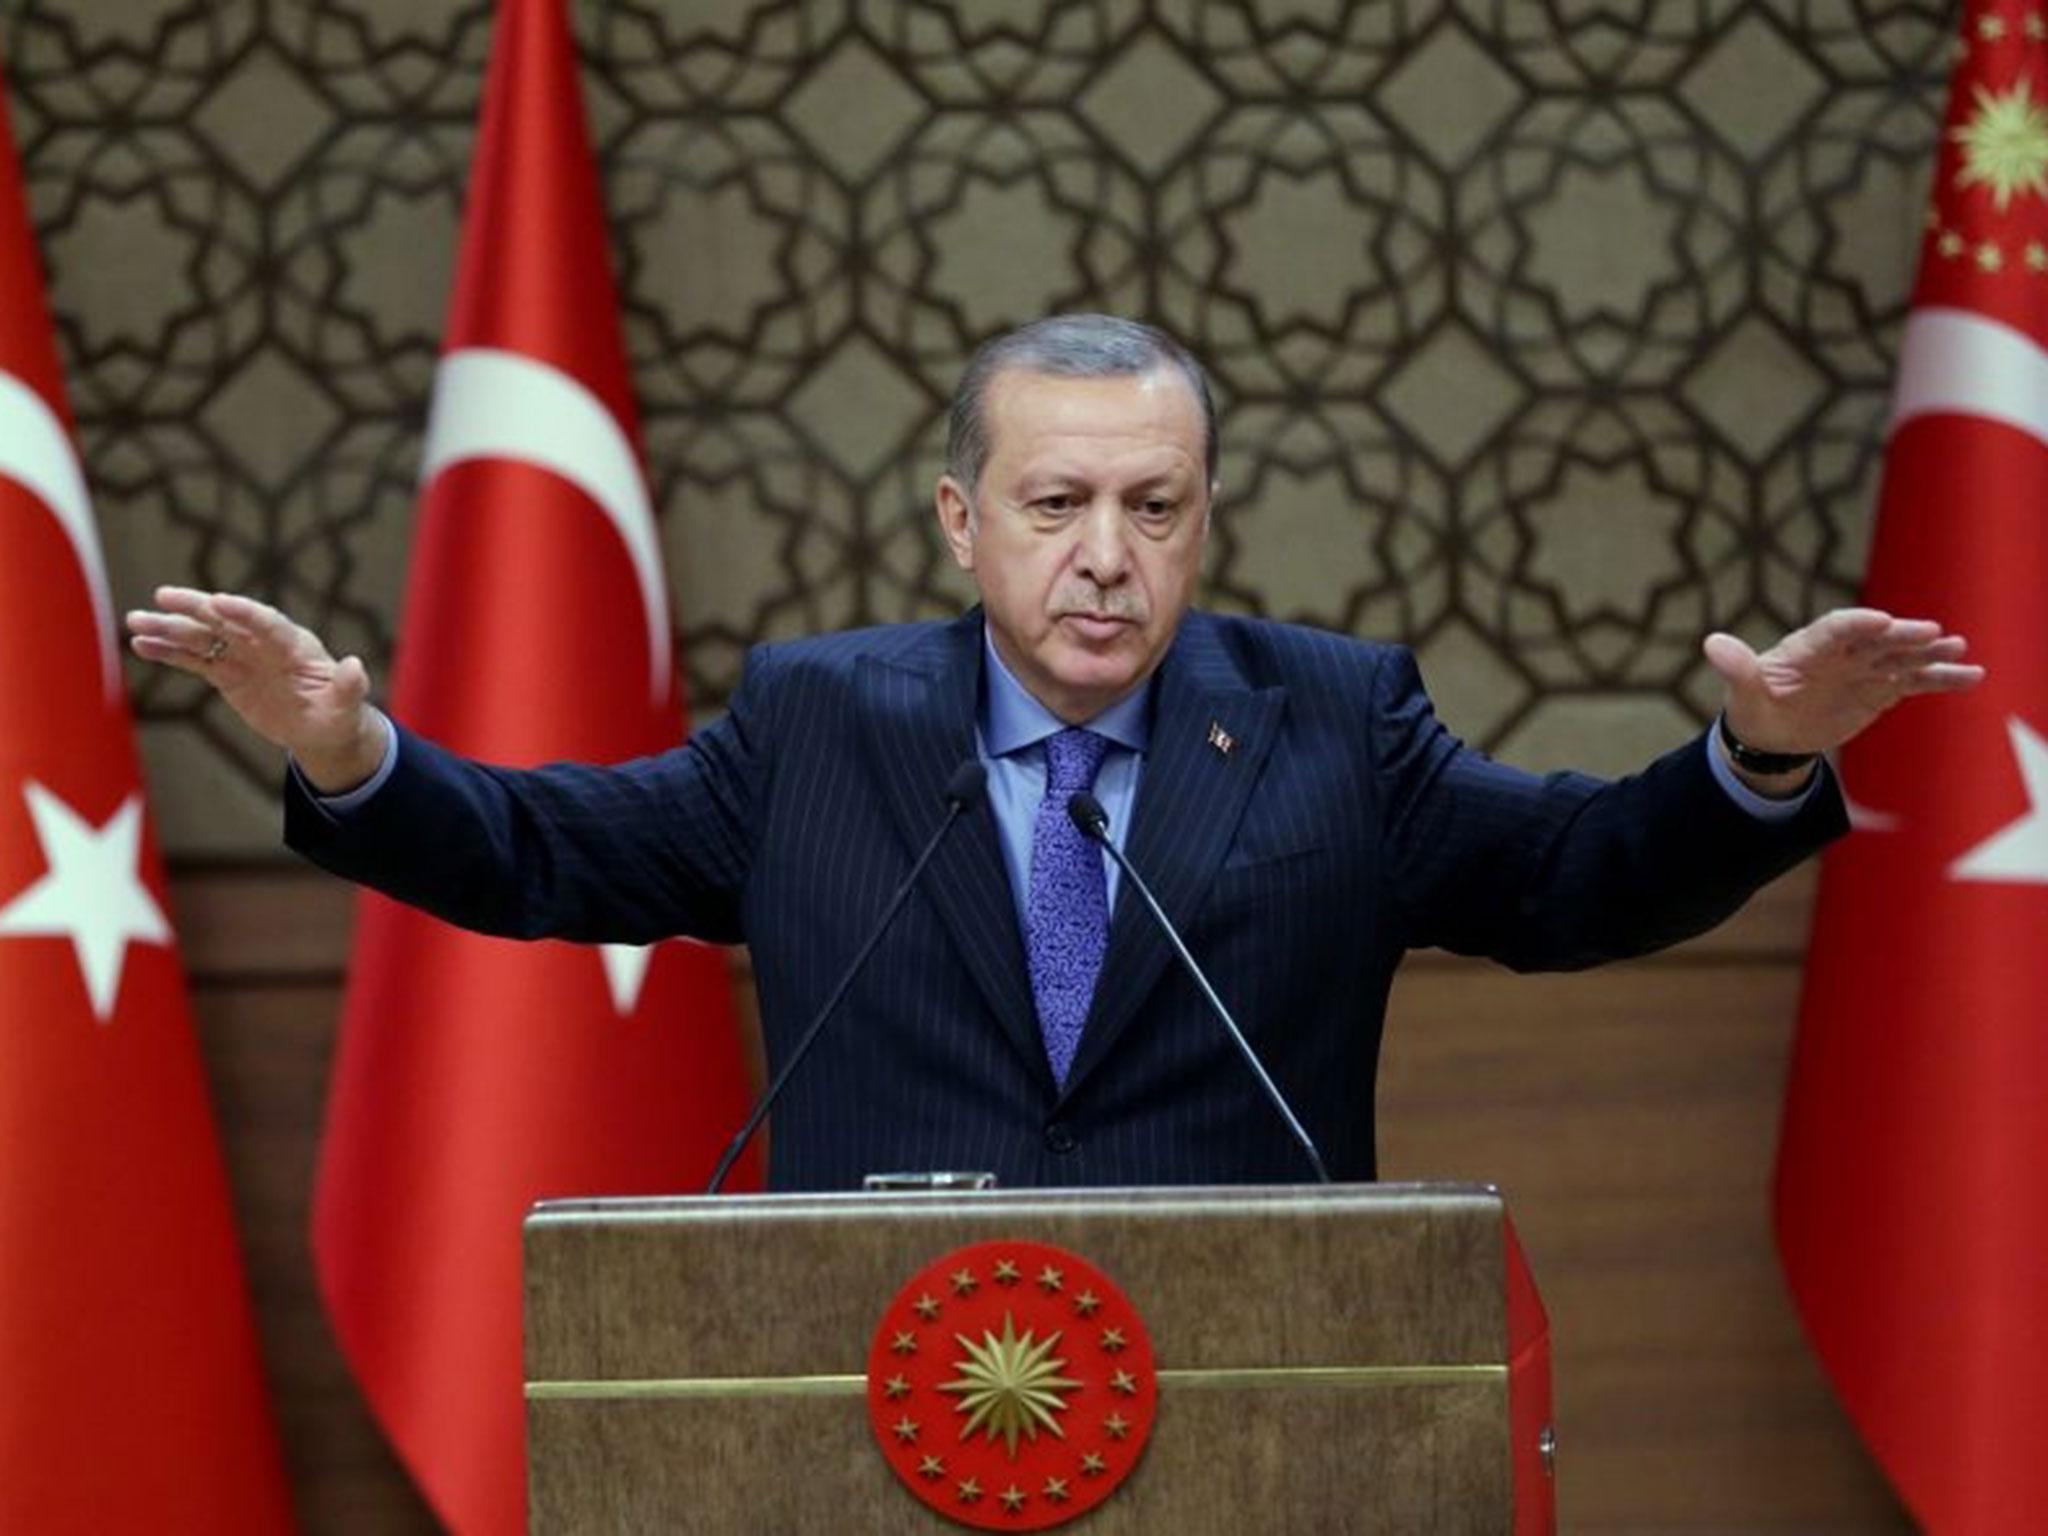 Turkish President Recep Tayyip Erdogan makes a speech during his meeting with mukhtars at the Presidential Palace in Ankara, Turkey, 19 October, 2016